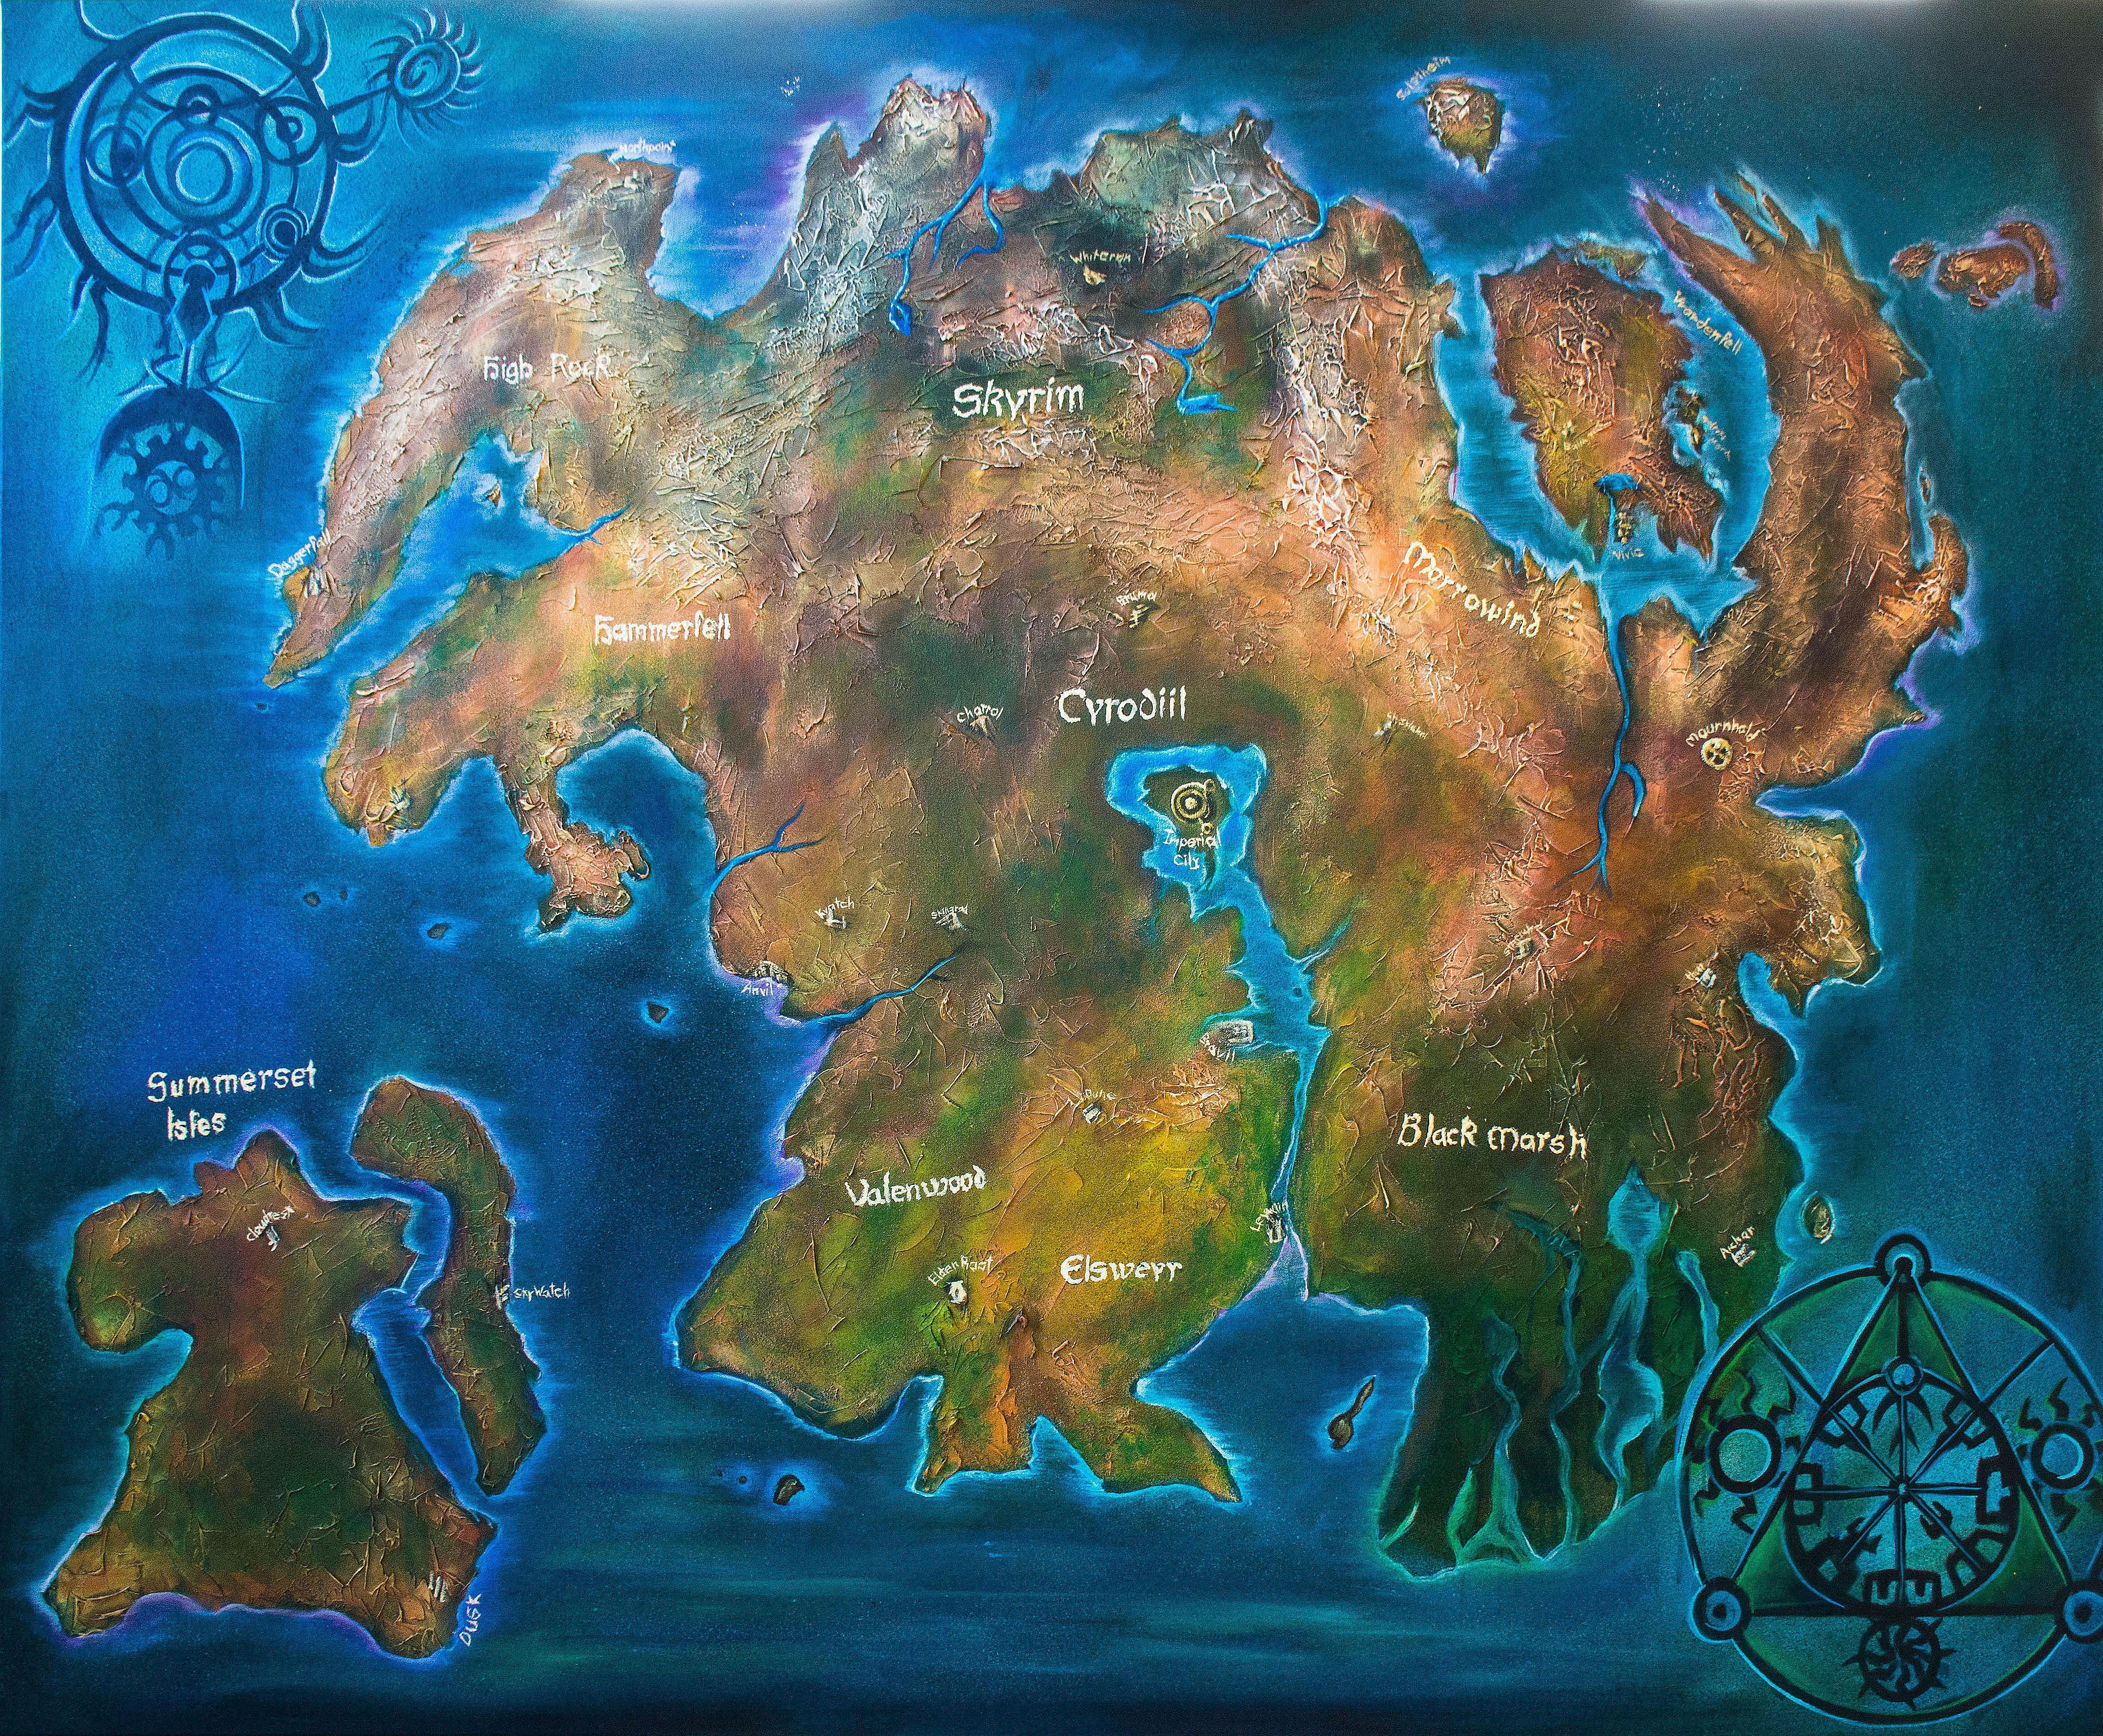 Just finished painting a map of Tamriel for my friend. I was told to